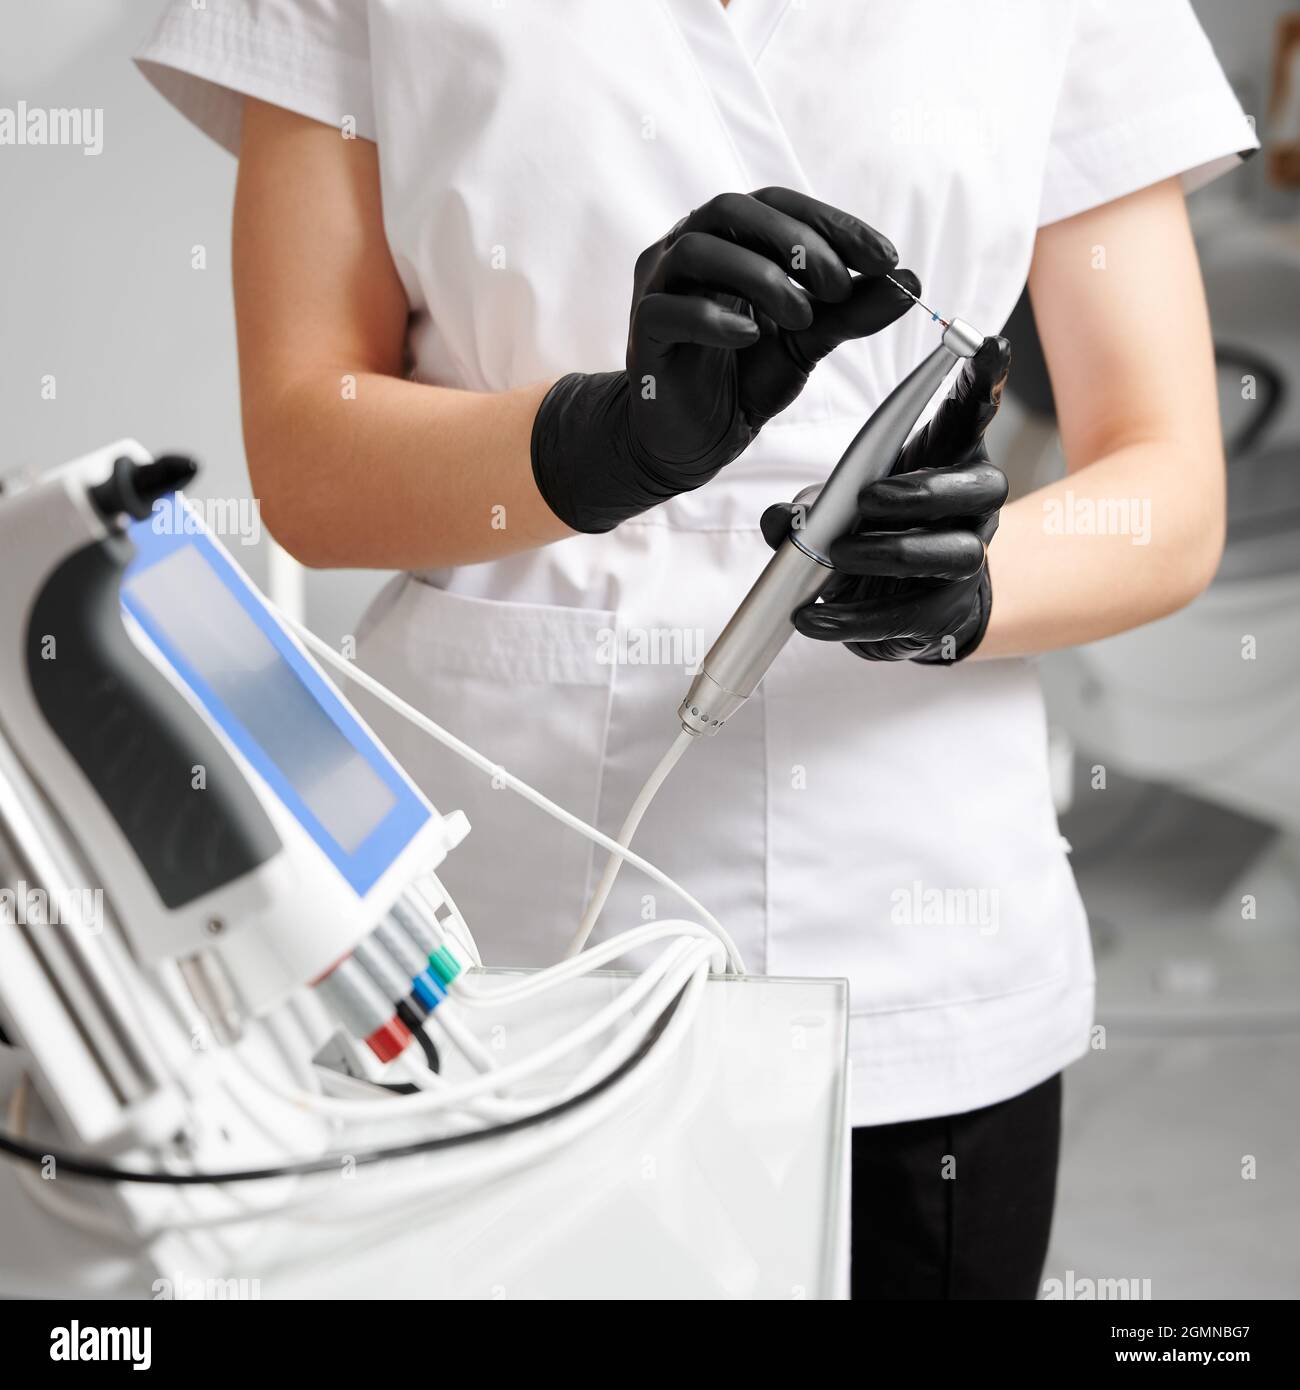 Close up of female doctor hands in sterile gloves holding endodontic endomotor for root canal treatment. Woman stomatologist preparing endodontic device for dental procedure. Concept of dentistry. Stock Photo